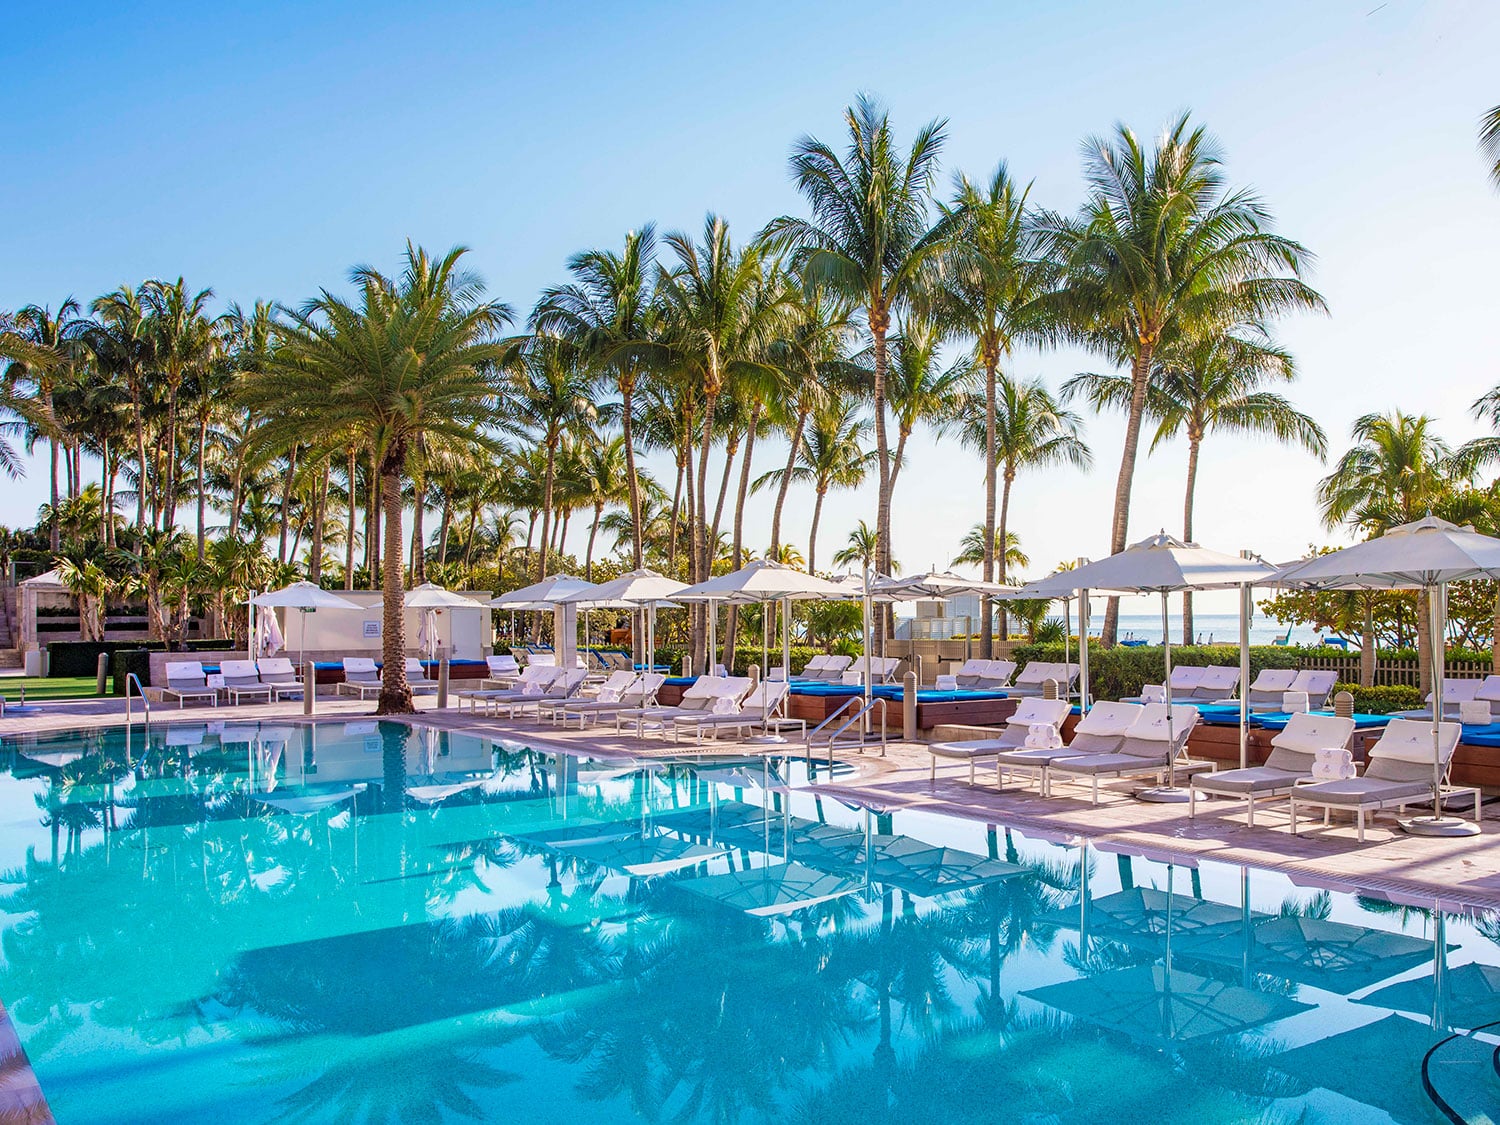 The family pool at the St. Regis Bal Harbour Resort in the South Florida village of Bal Harbour.